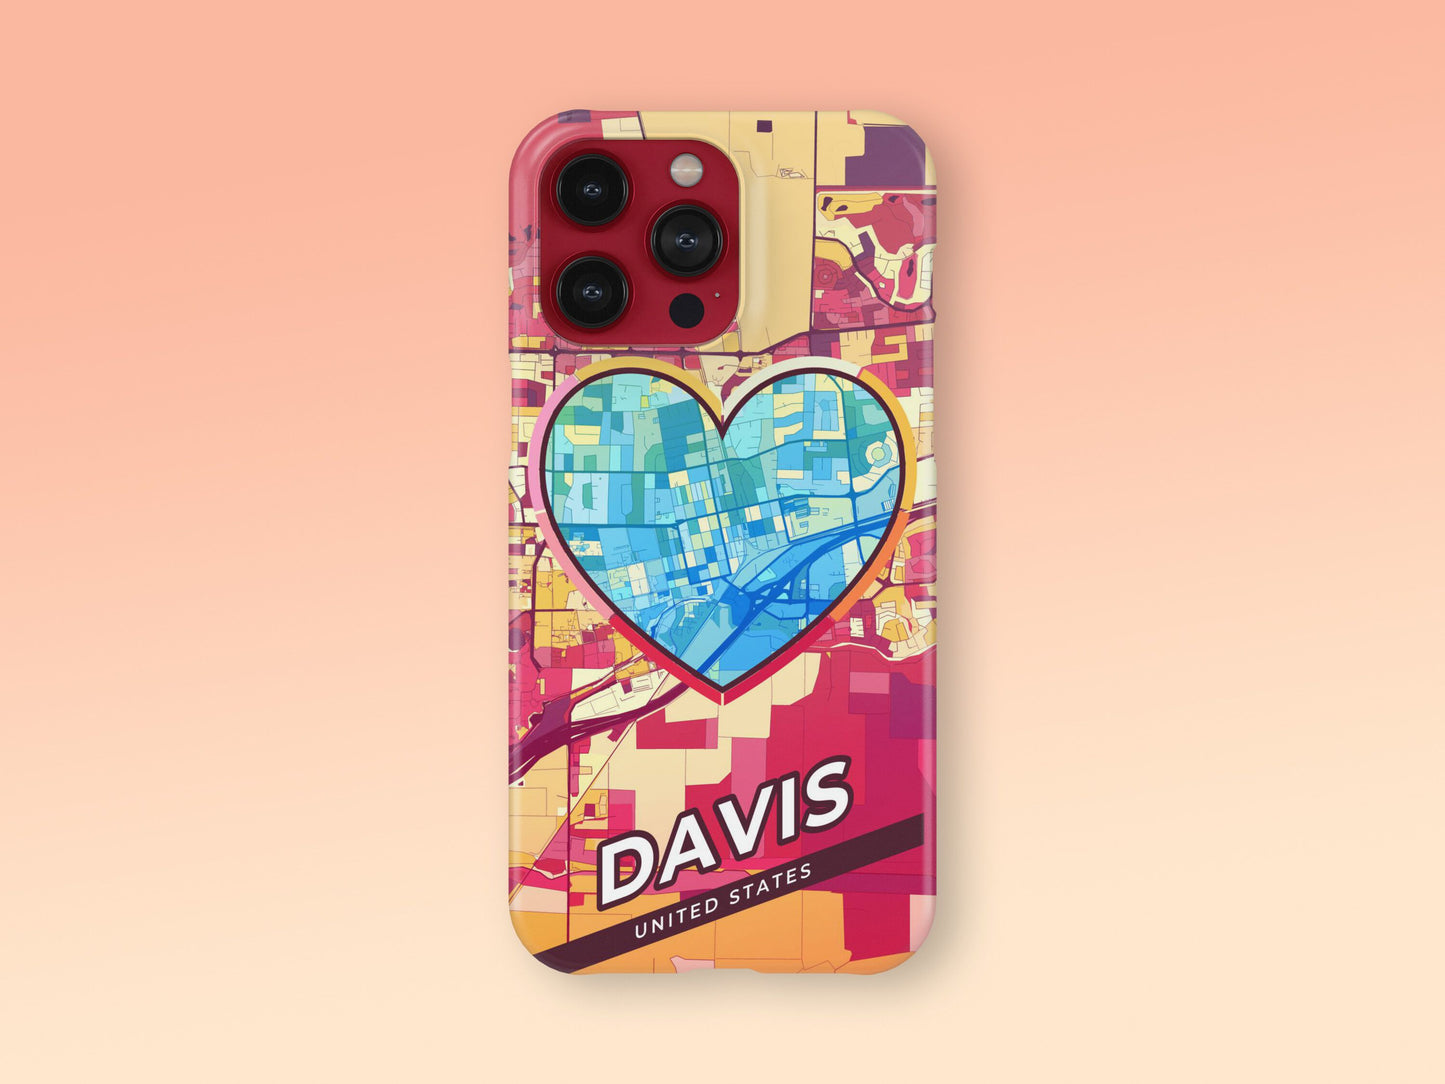 Davis California slim phone case with colorful icon. Birthday, wedding or housewarming gift. Couple match cases. 2